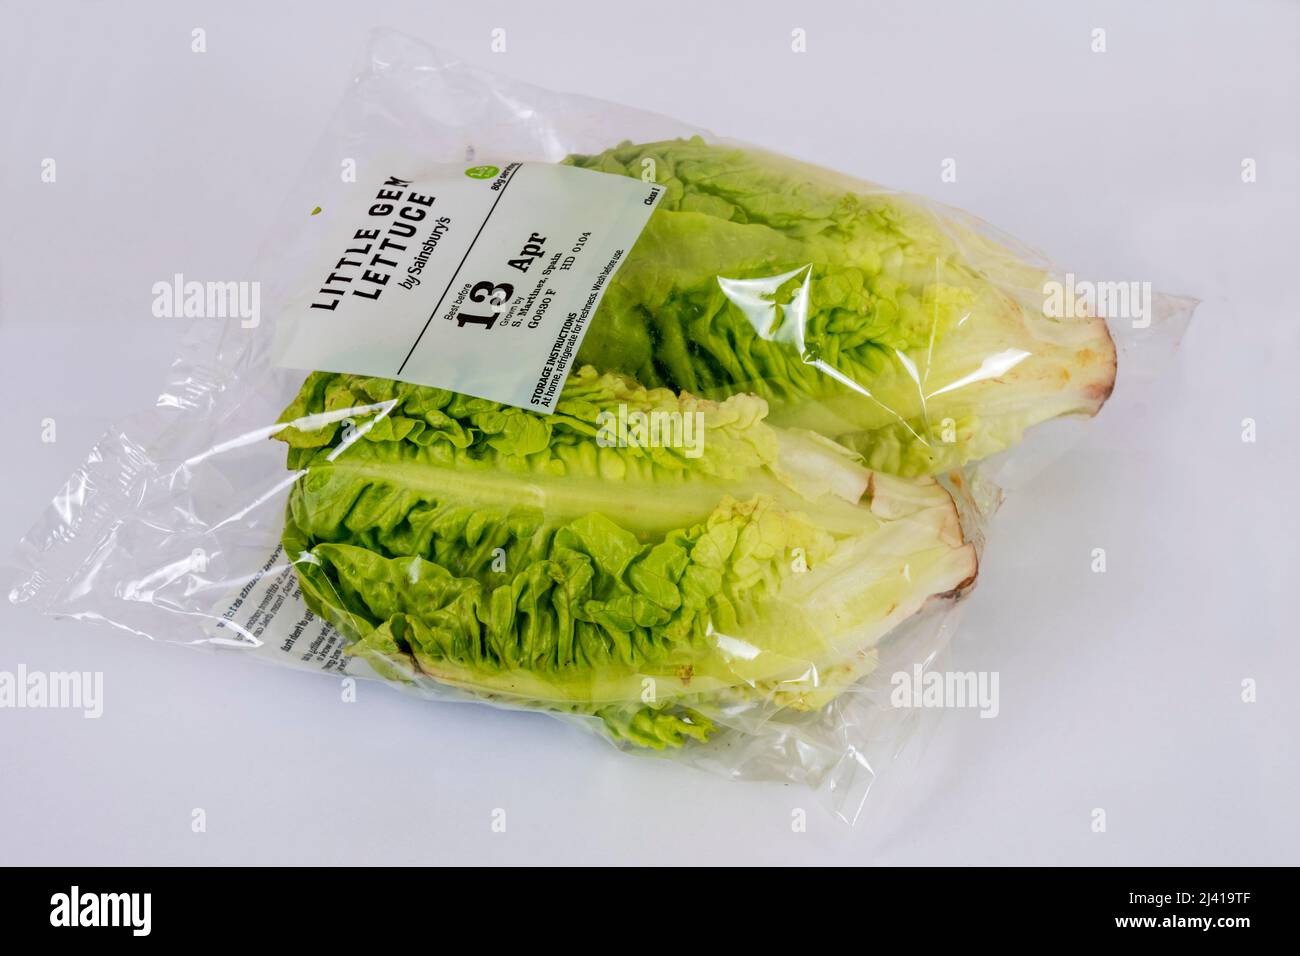 A packet of two plastic-wrapped Sainsbury's Little Gem lettuces. Stock Photo